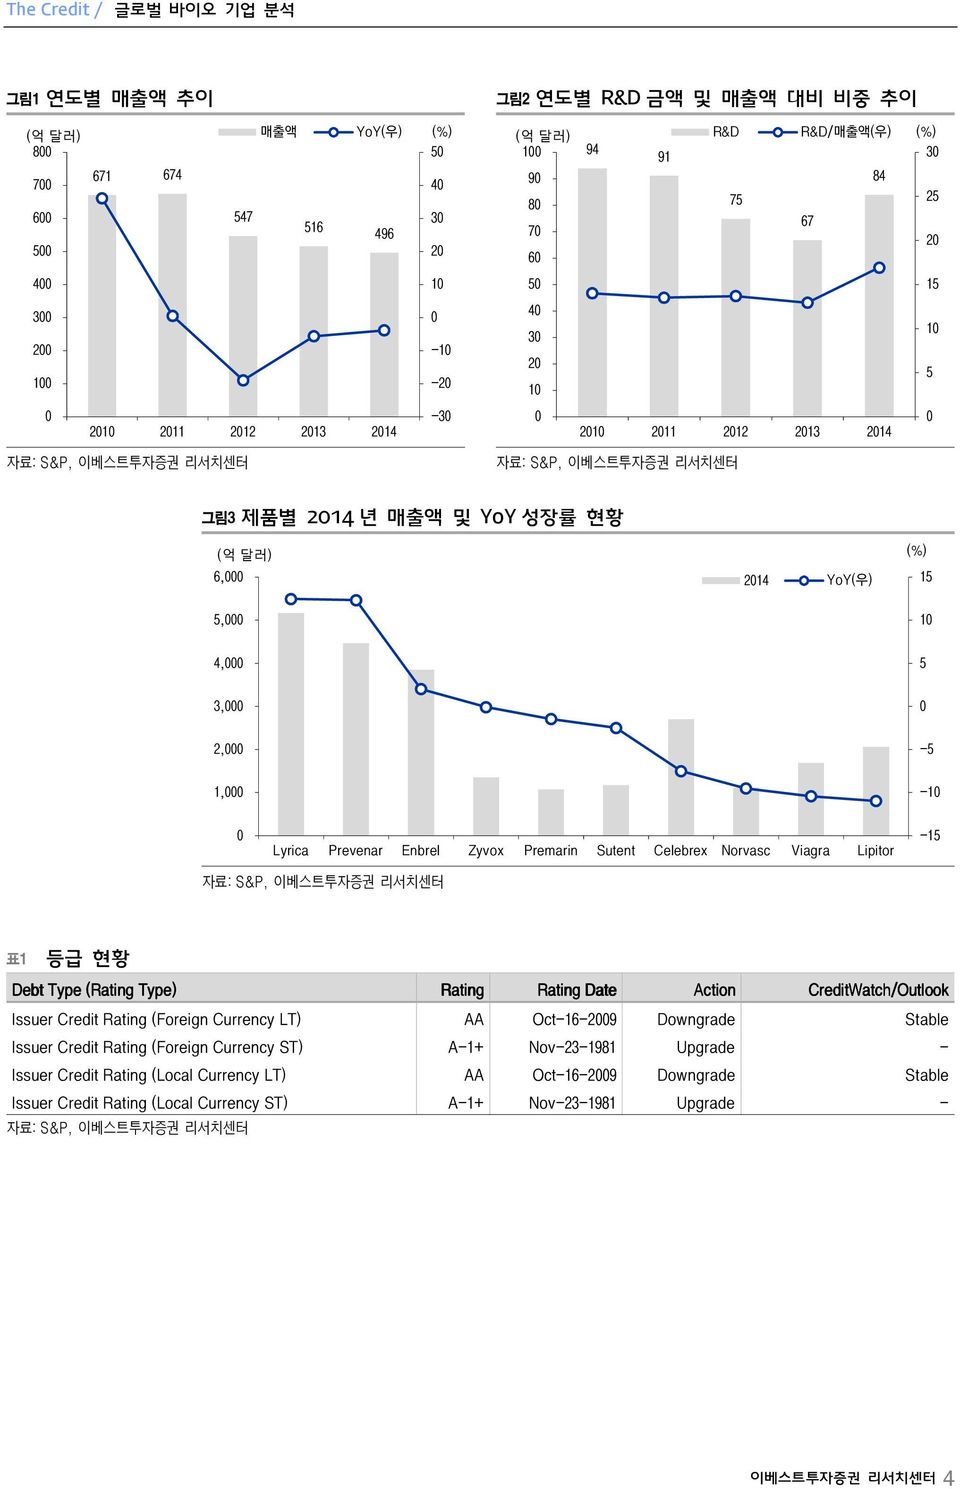 Viagra Lipitor -15 표1 등급 현황 Debt Type (Rating Type) Rating Rating Date Action CreditWatch/Outlook Issuer Credit Rating (Foreign Currency LT) AA Oct-16-29 Downgrade Stable Issuer Credit Rating